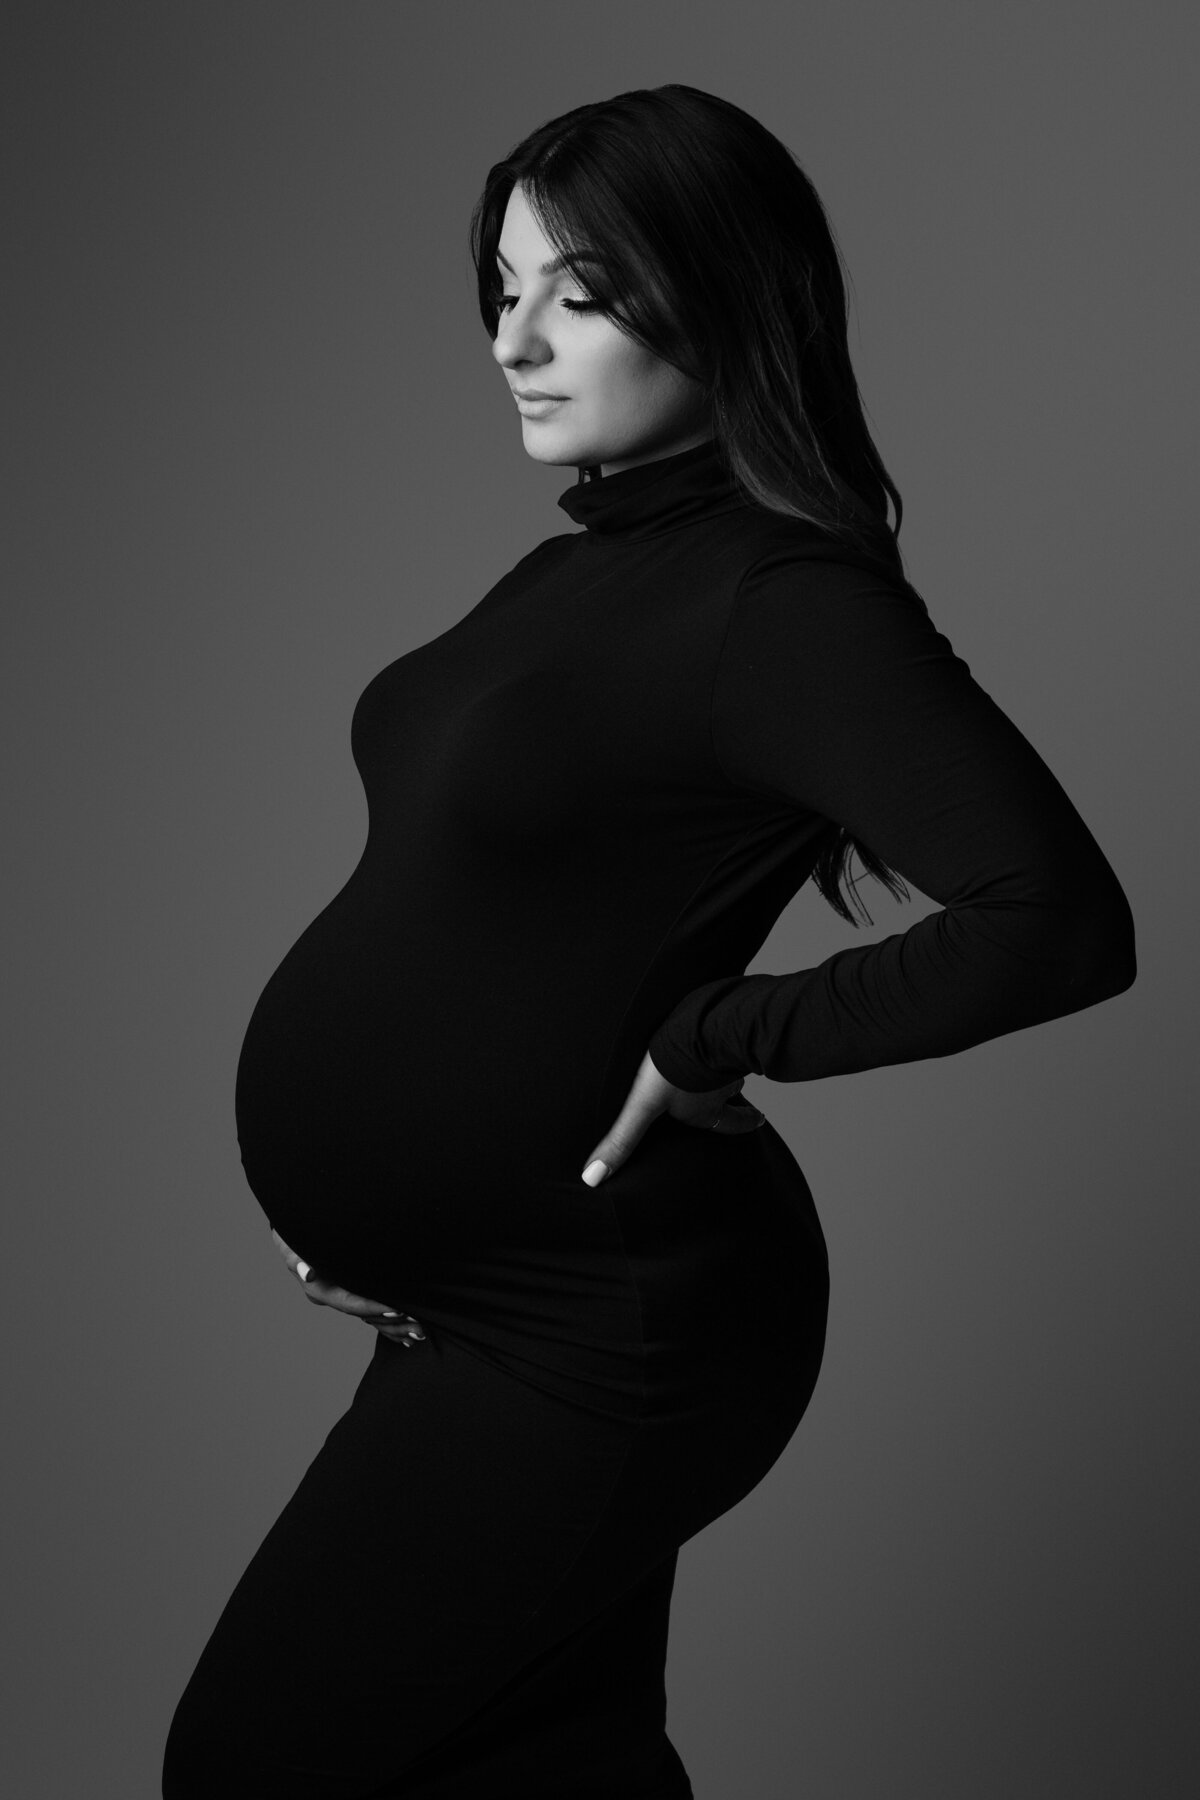 Black and white maternity portrait of a woman wearing long sleeve fitted black long dress holding one hand behind back and other hand on tummy looking down at baby bump